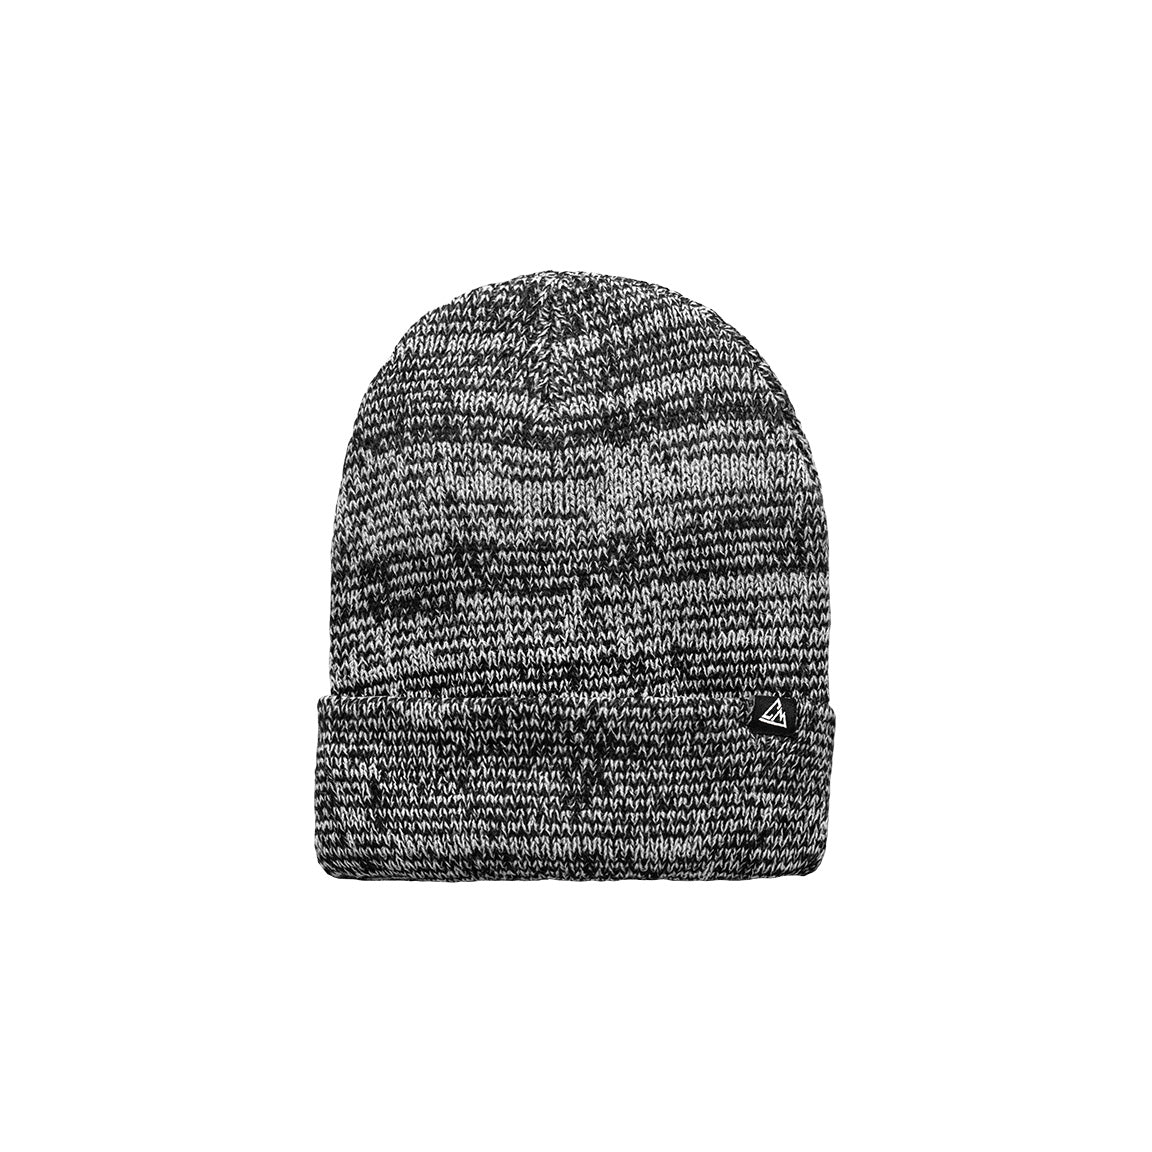 A black and white two-toned knit beanie with a subtle marled pattern throughout and a small triangular logo on the fold.